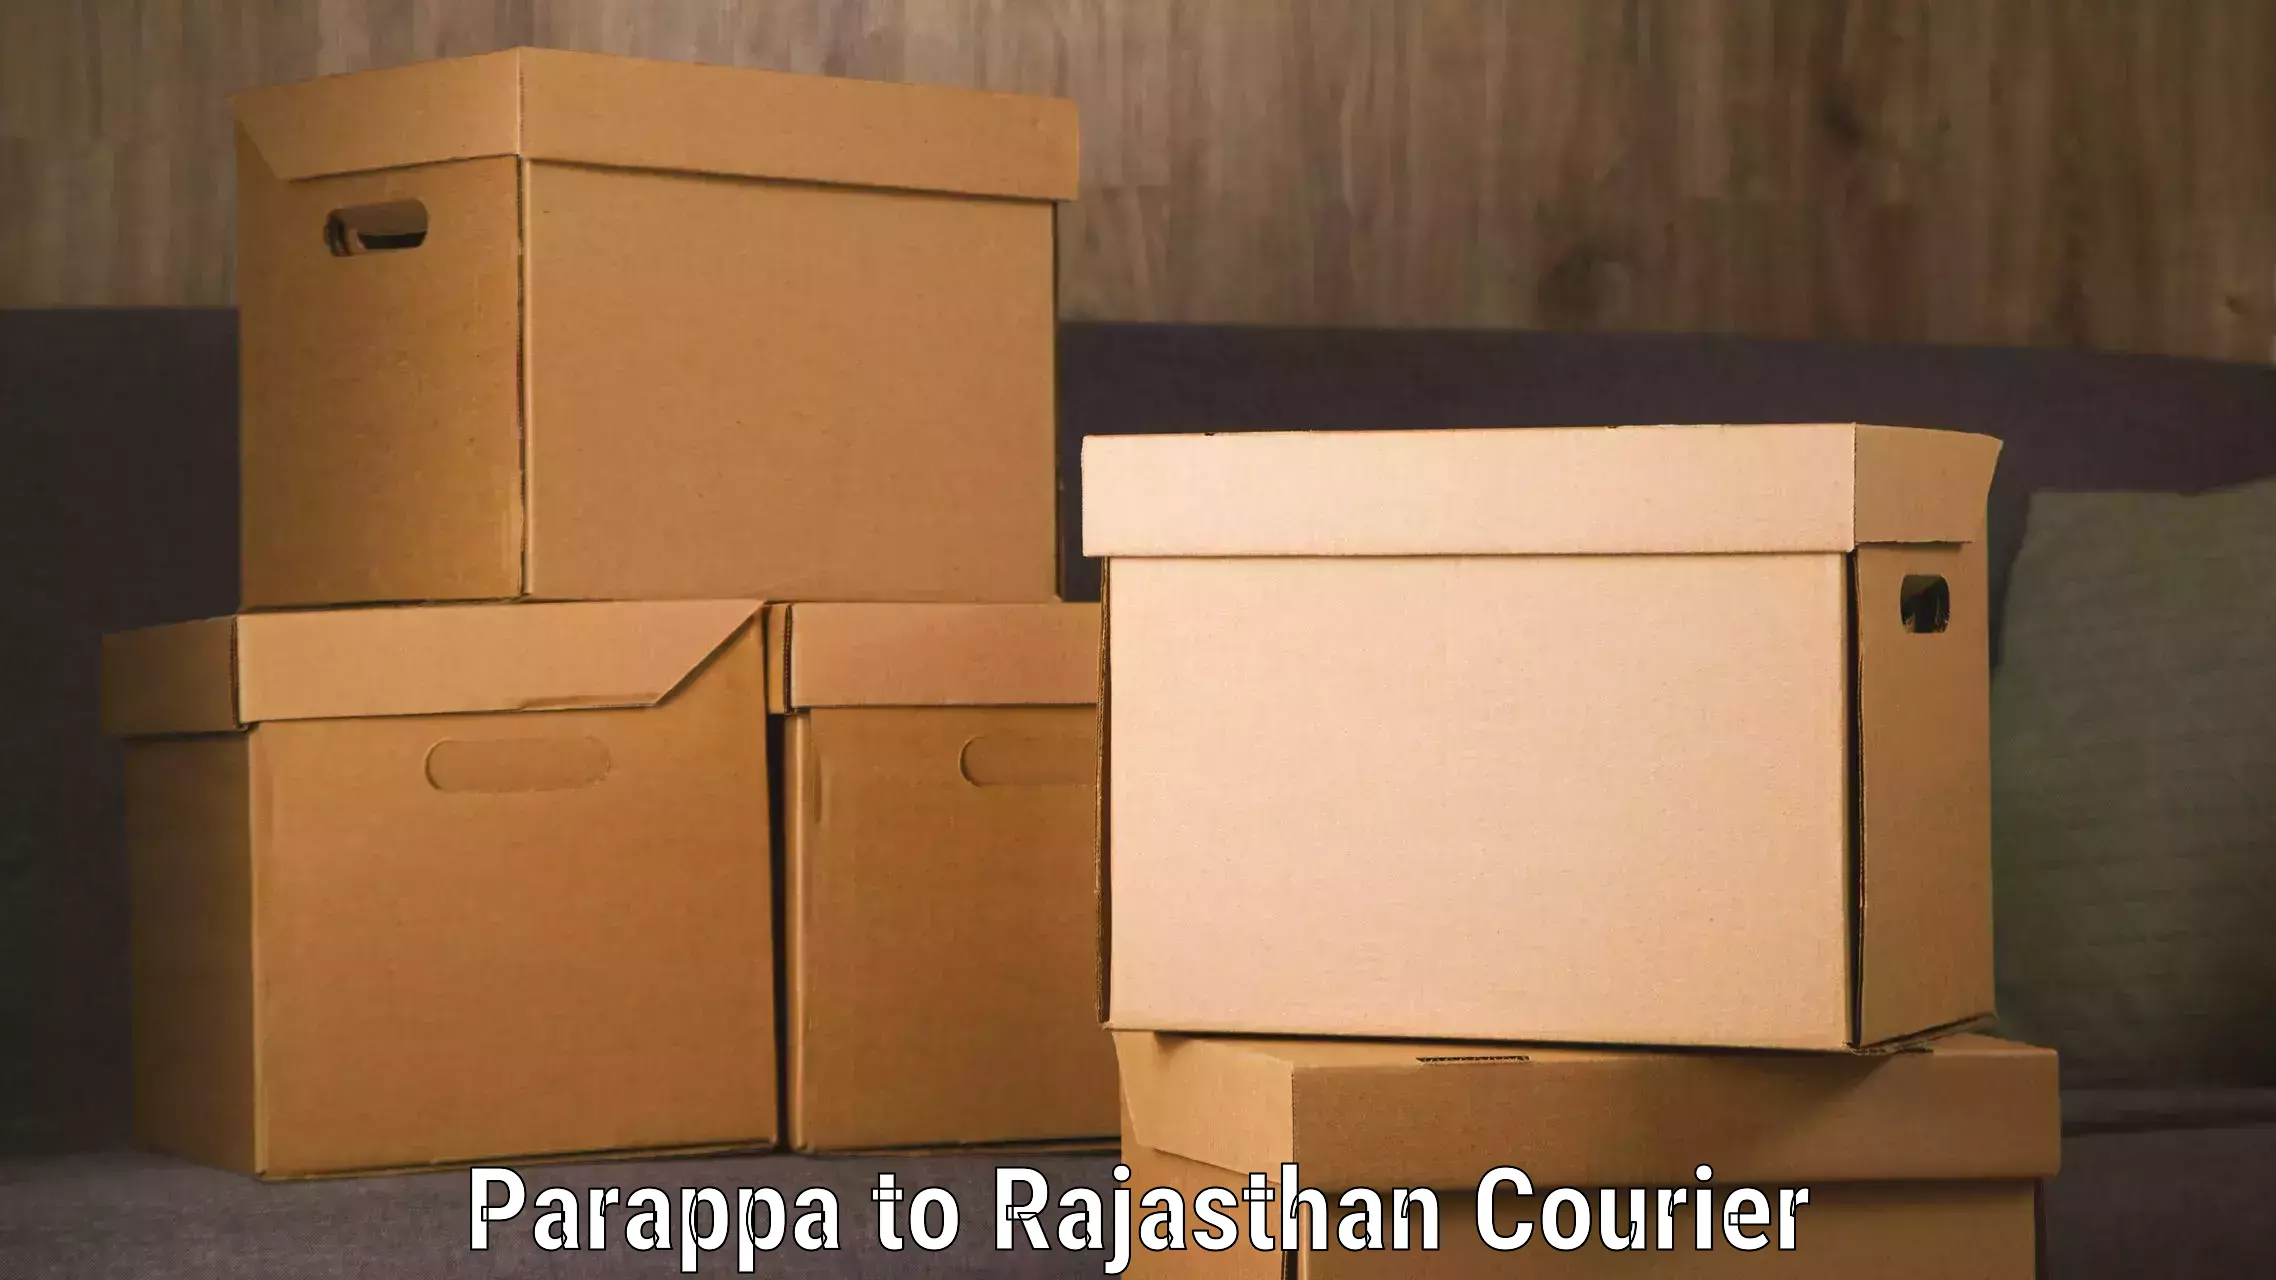 Parcel delivery automation Parappa to Rajasthan